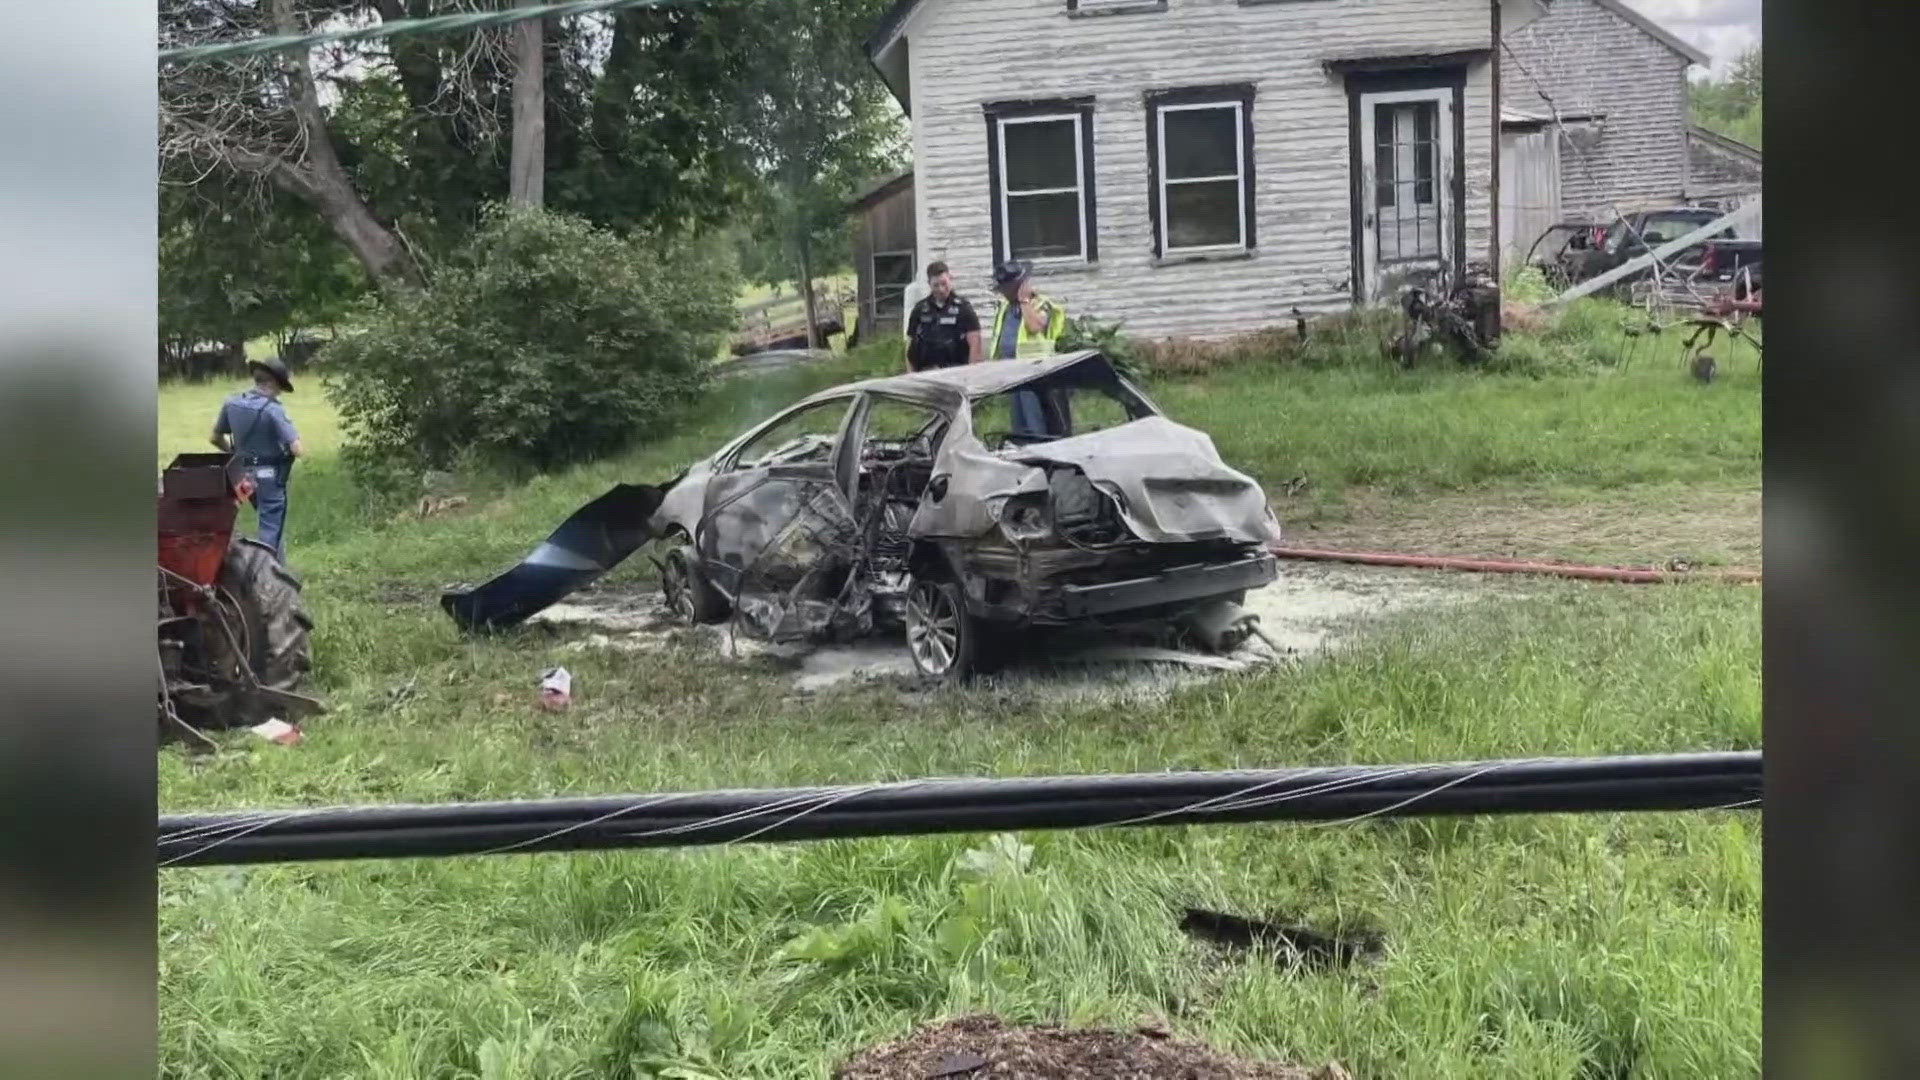 The woman was reportedly ejected from her vehicle during the crash before the vehicle burst into flames, an emergency official said.